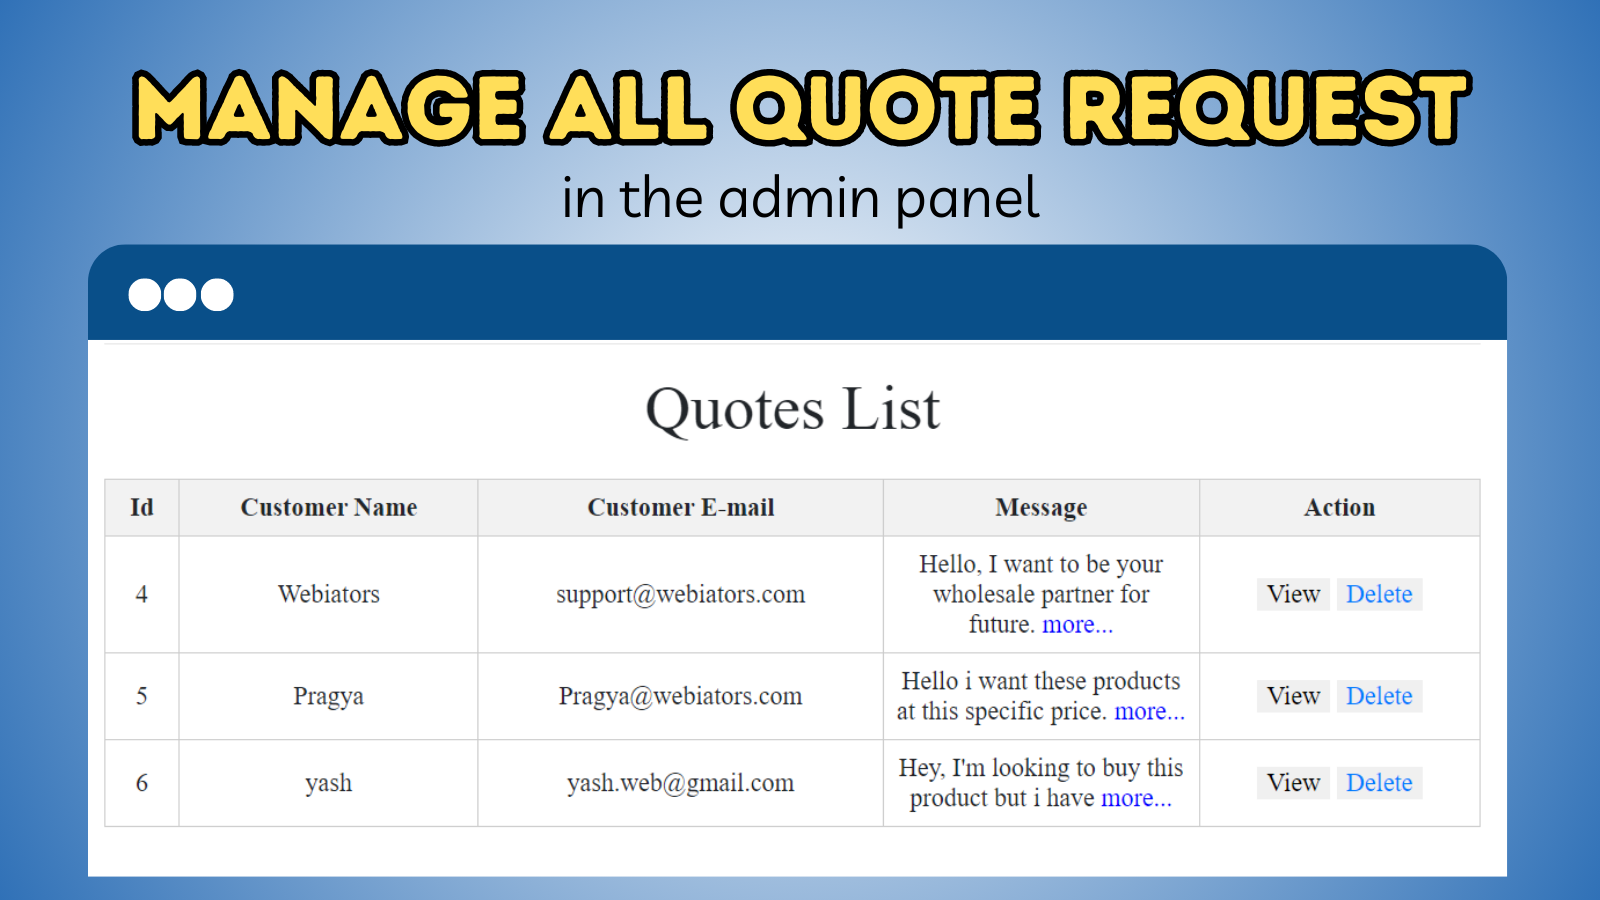 Manage all quote request in the admin panel